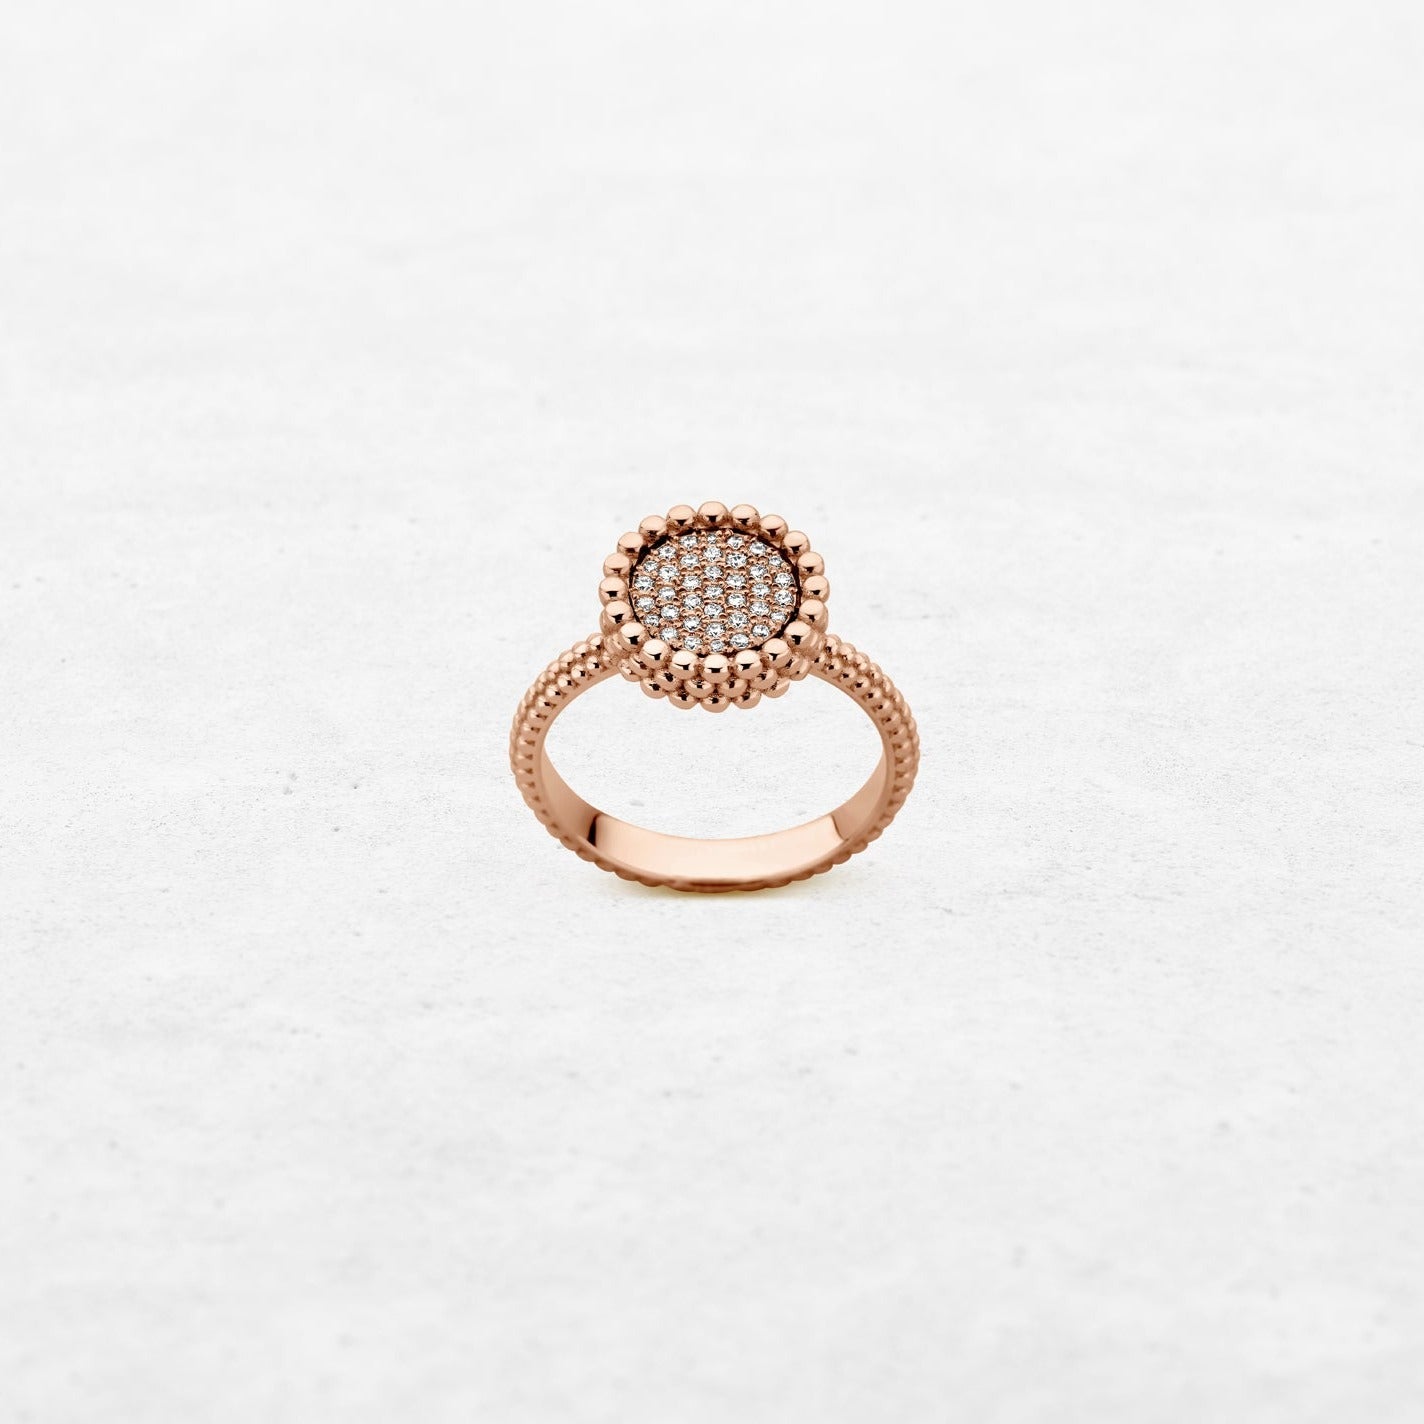 Diamond ring with diamonds in rose gold made by O! Jewelry